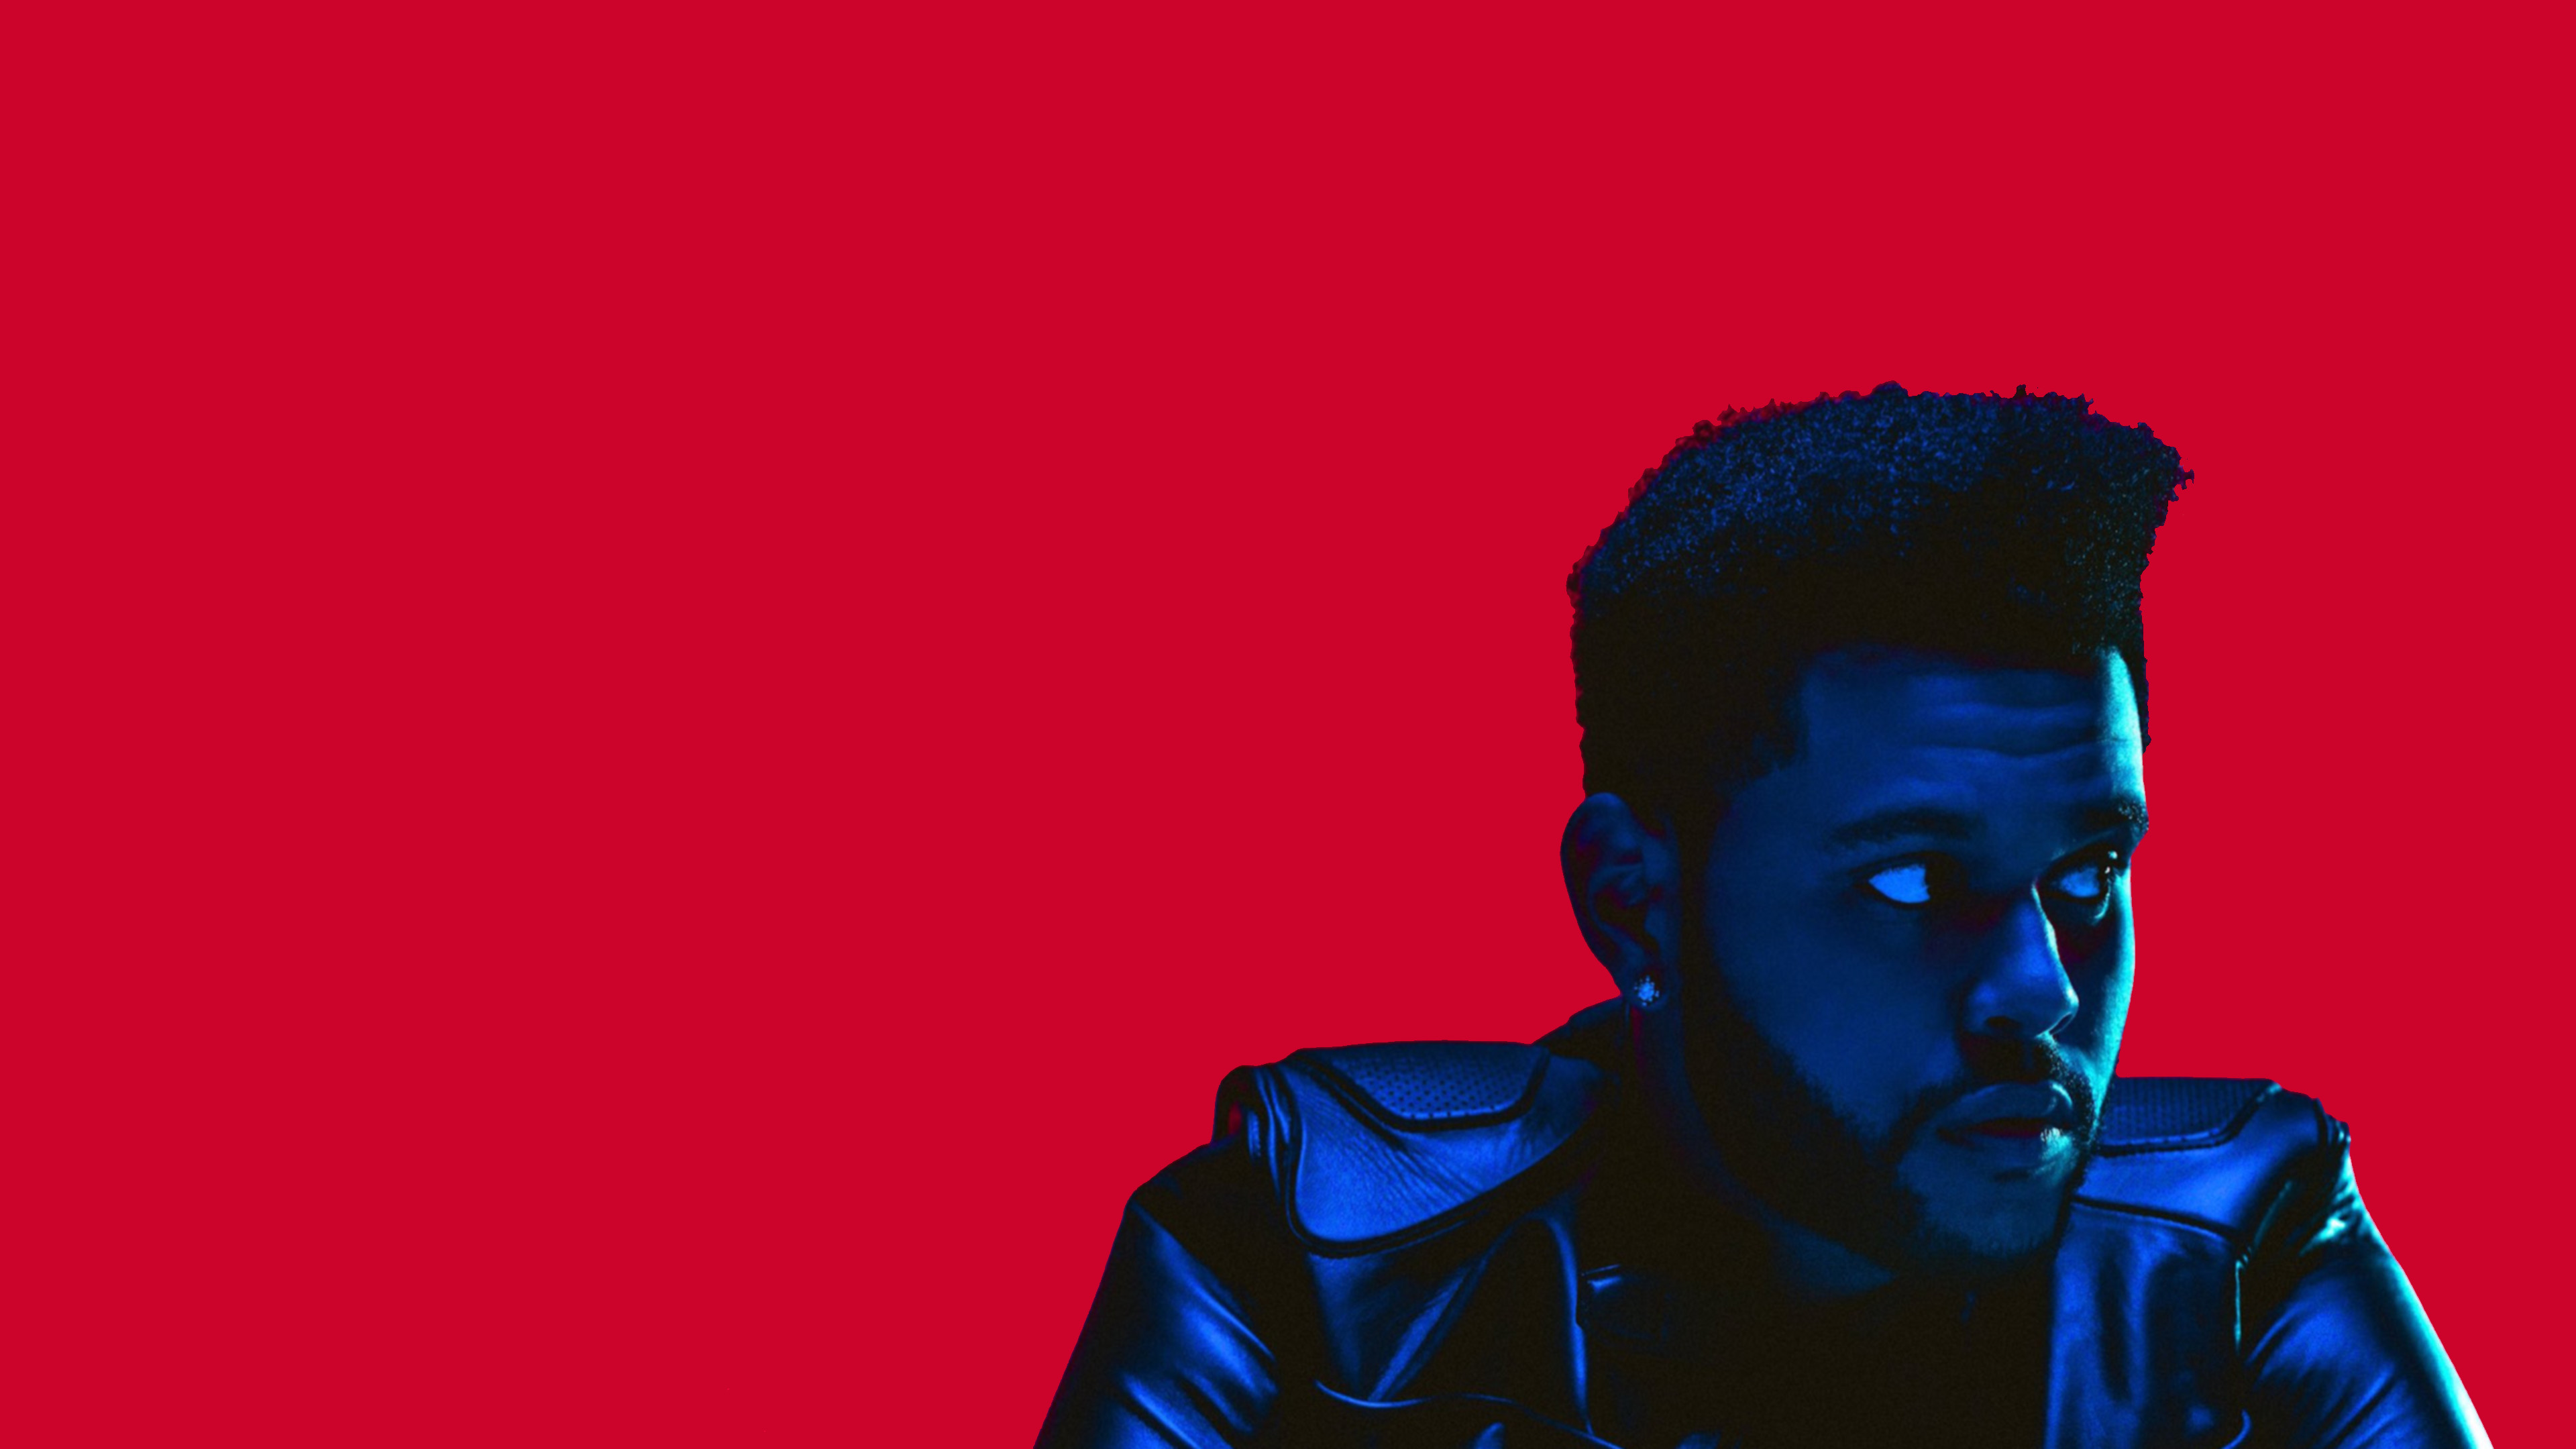 Free download Freshthe Weeknd Weeknd Starboy 3840x2160 Wallpaper  Ecopetitcat [3840x2160] for your Desktop, Mobile & Tablet | Explore 56+  Weeknd Backgrounds | The Weeknd Wallpaper Tumblr, The Weeknd XO Wallpaper,  The Weeknd HD Wallpaper